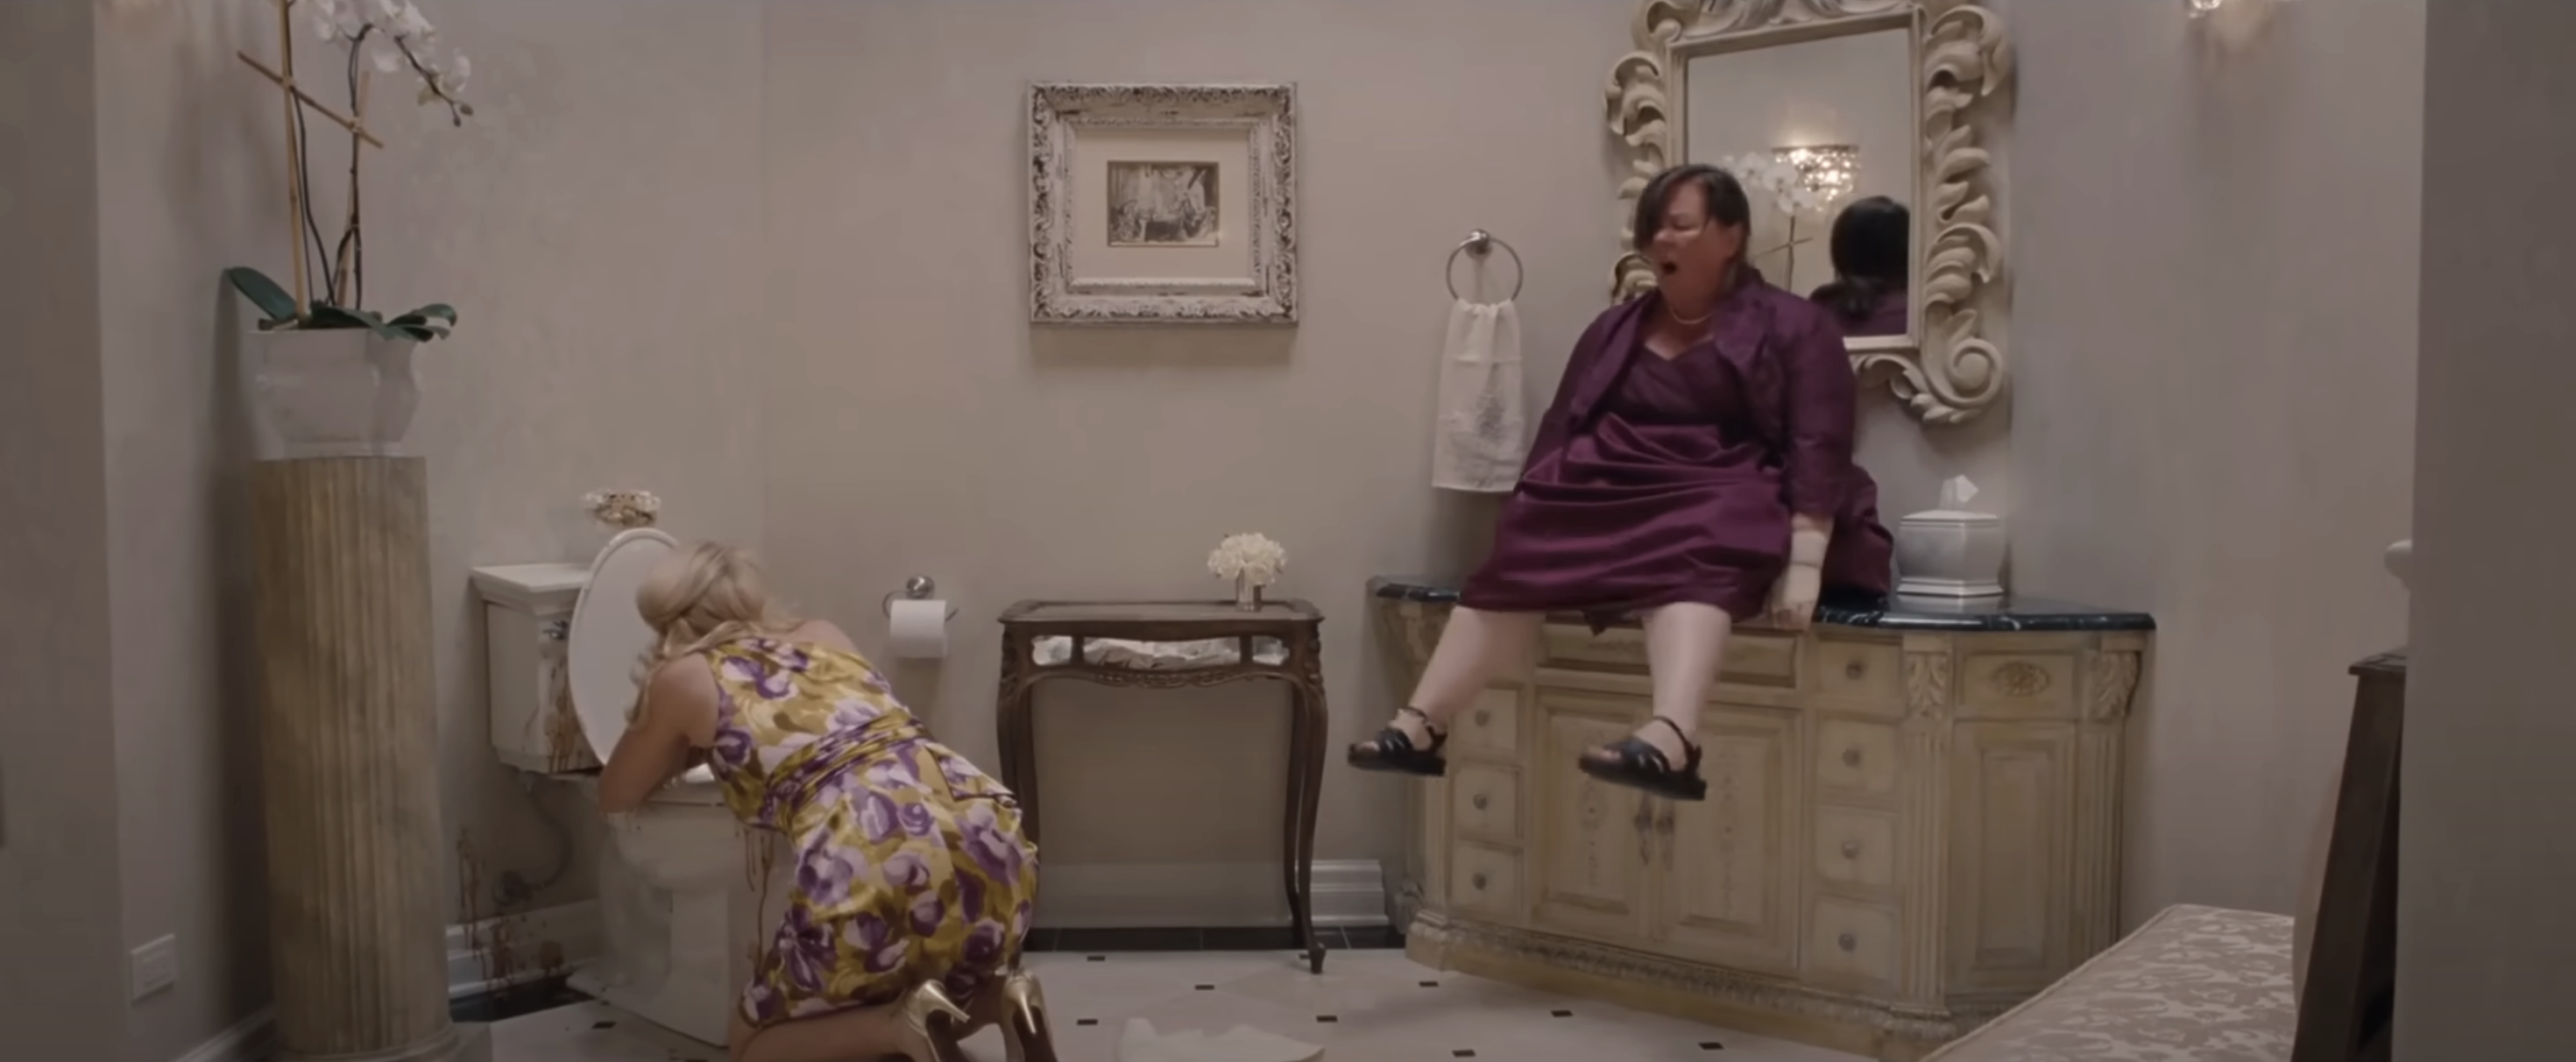 Two characters from Bridesmaids in a bathroom, one sitting on a sink, one kneeling by a toilet. Expressions suggest distress